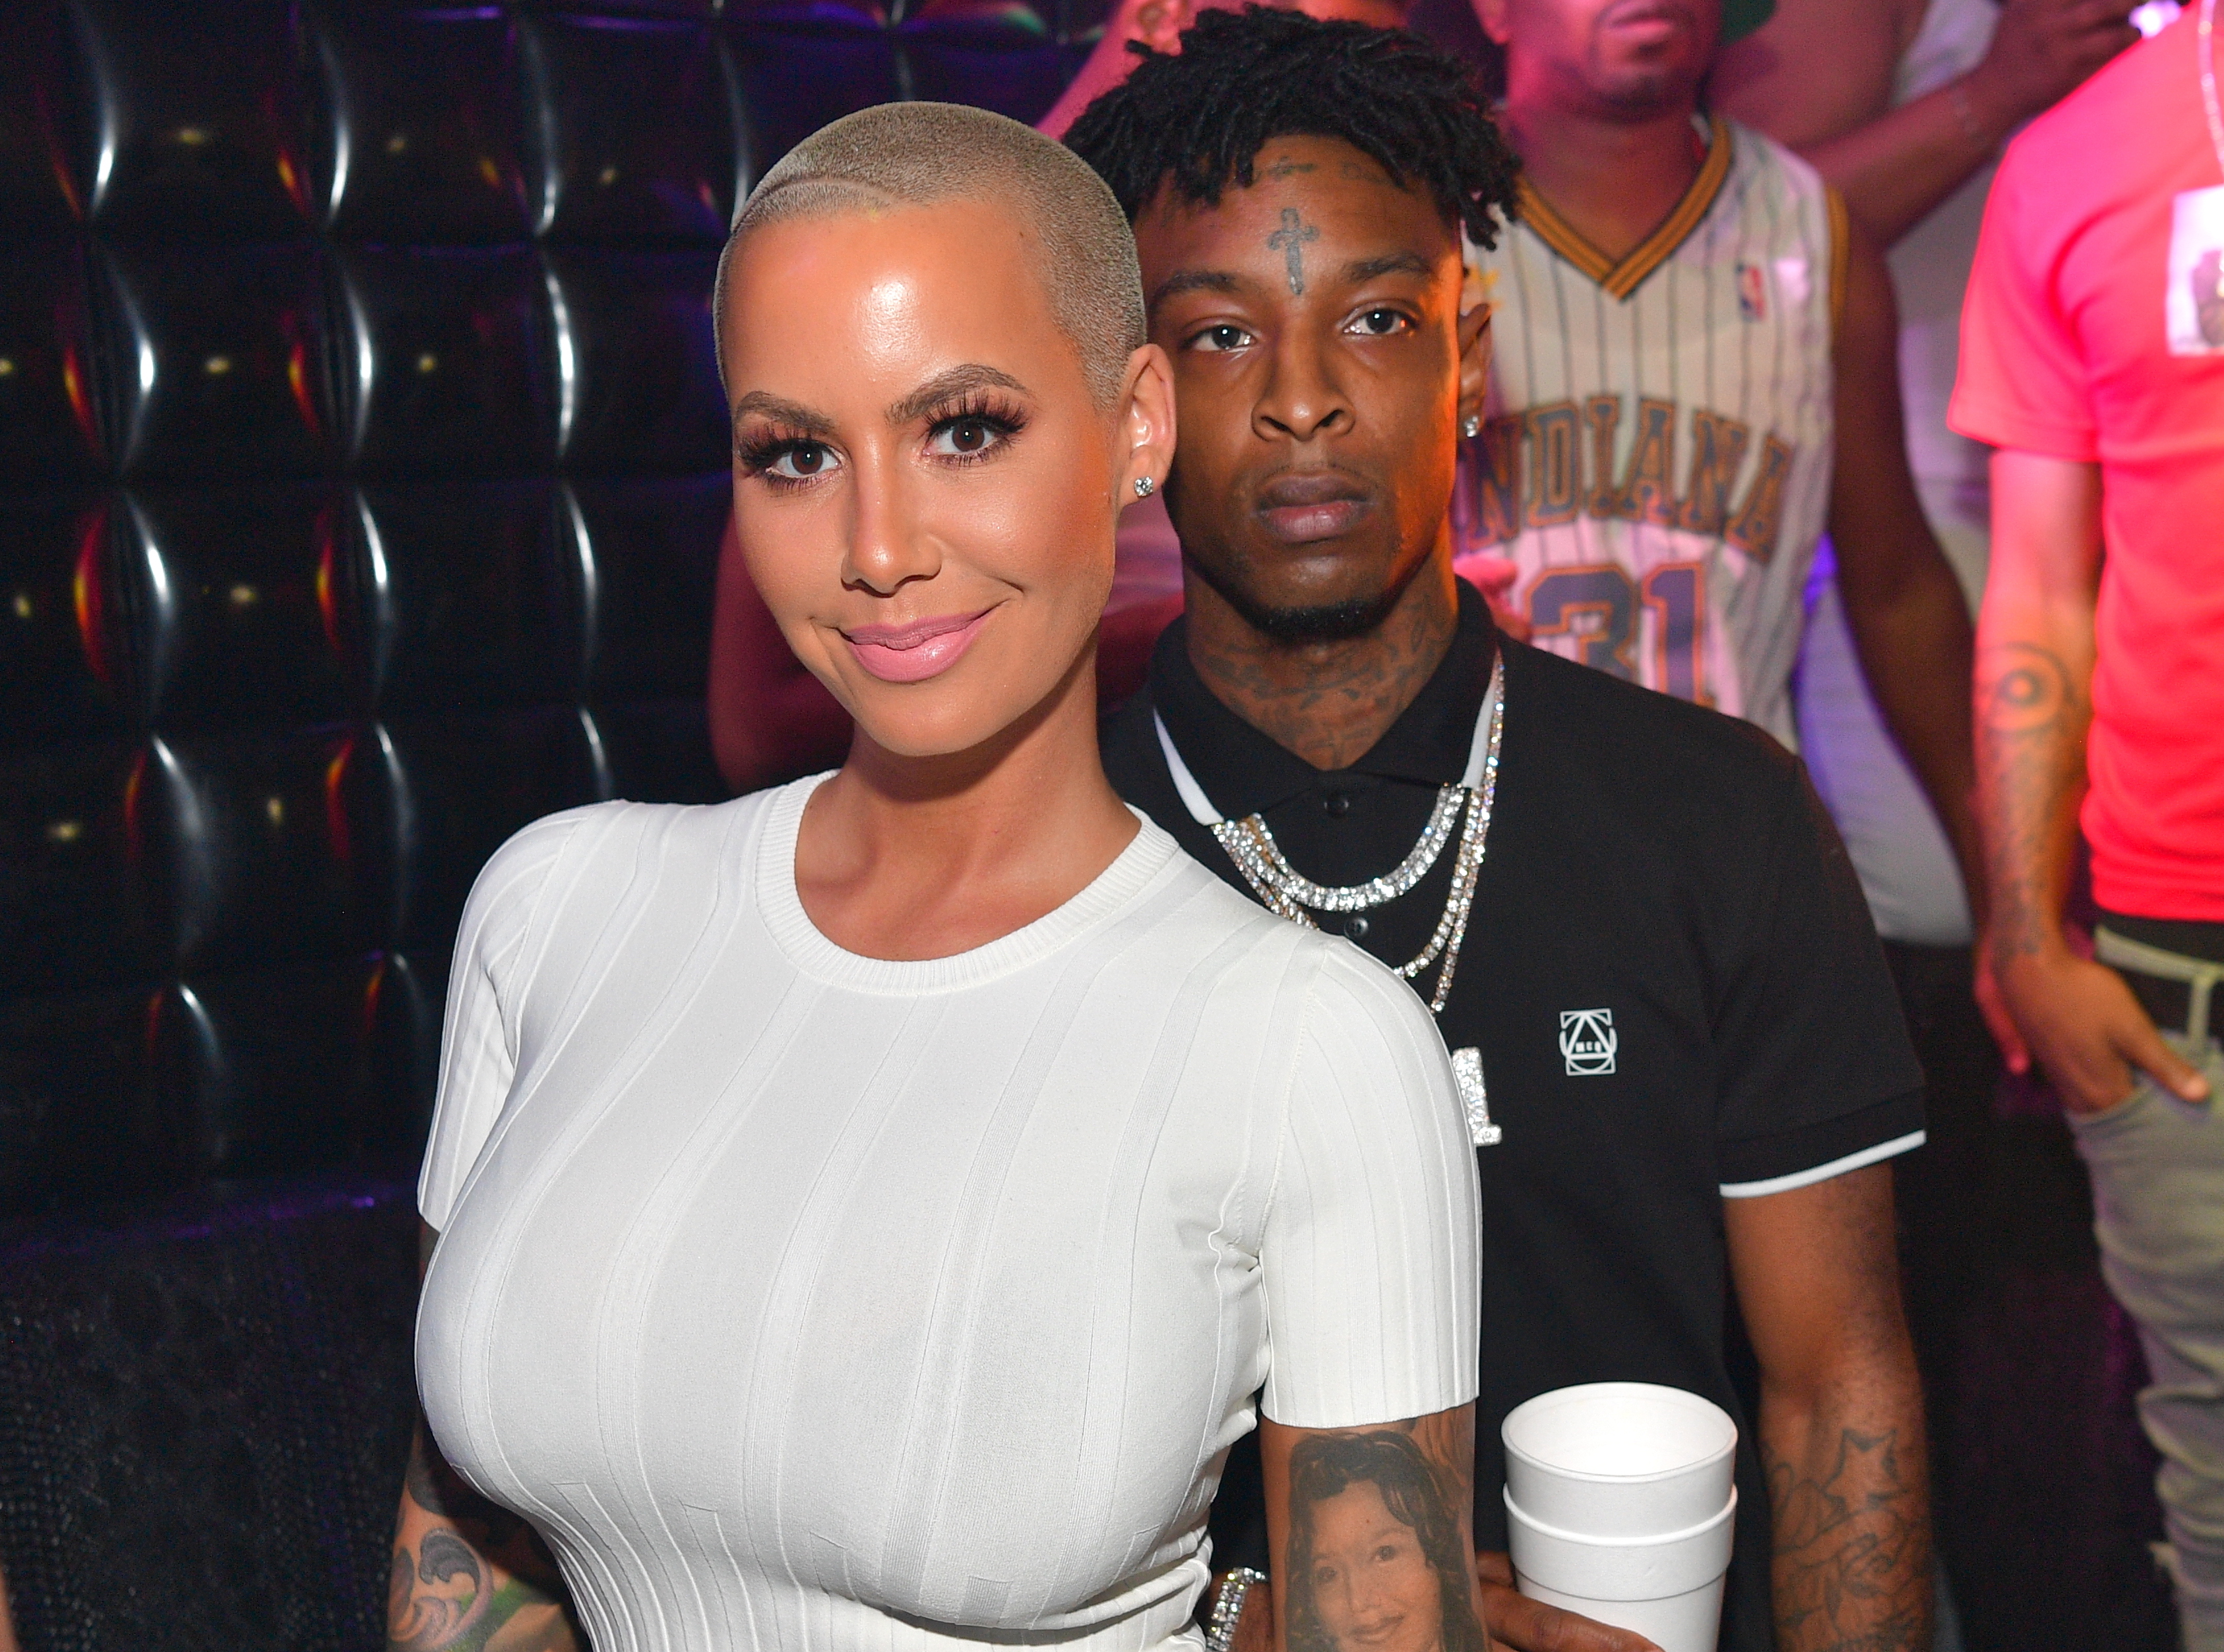 21 Savage Reveals He's “Married”, Says He Doesn't Miss Amber Rose